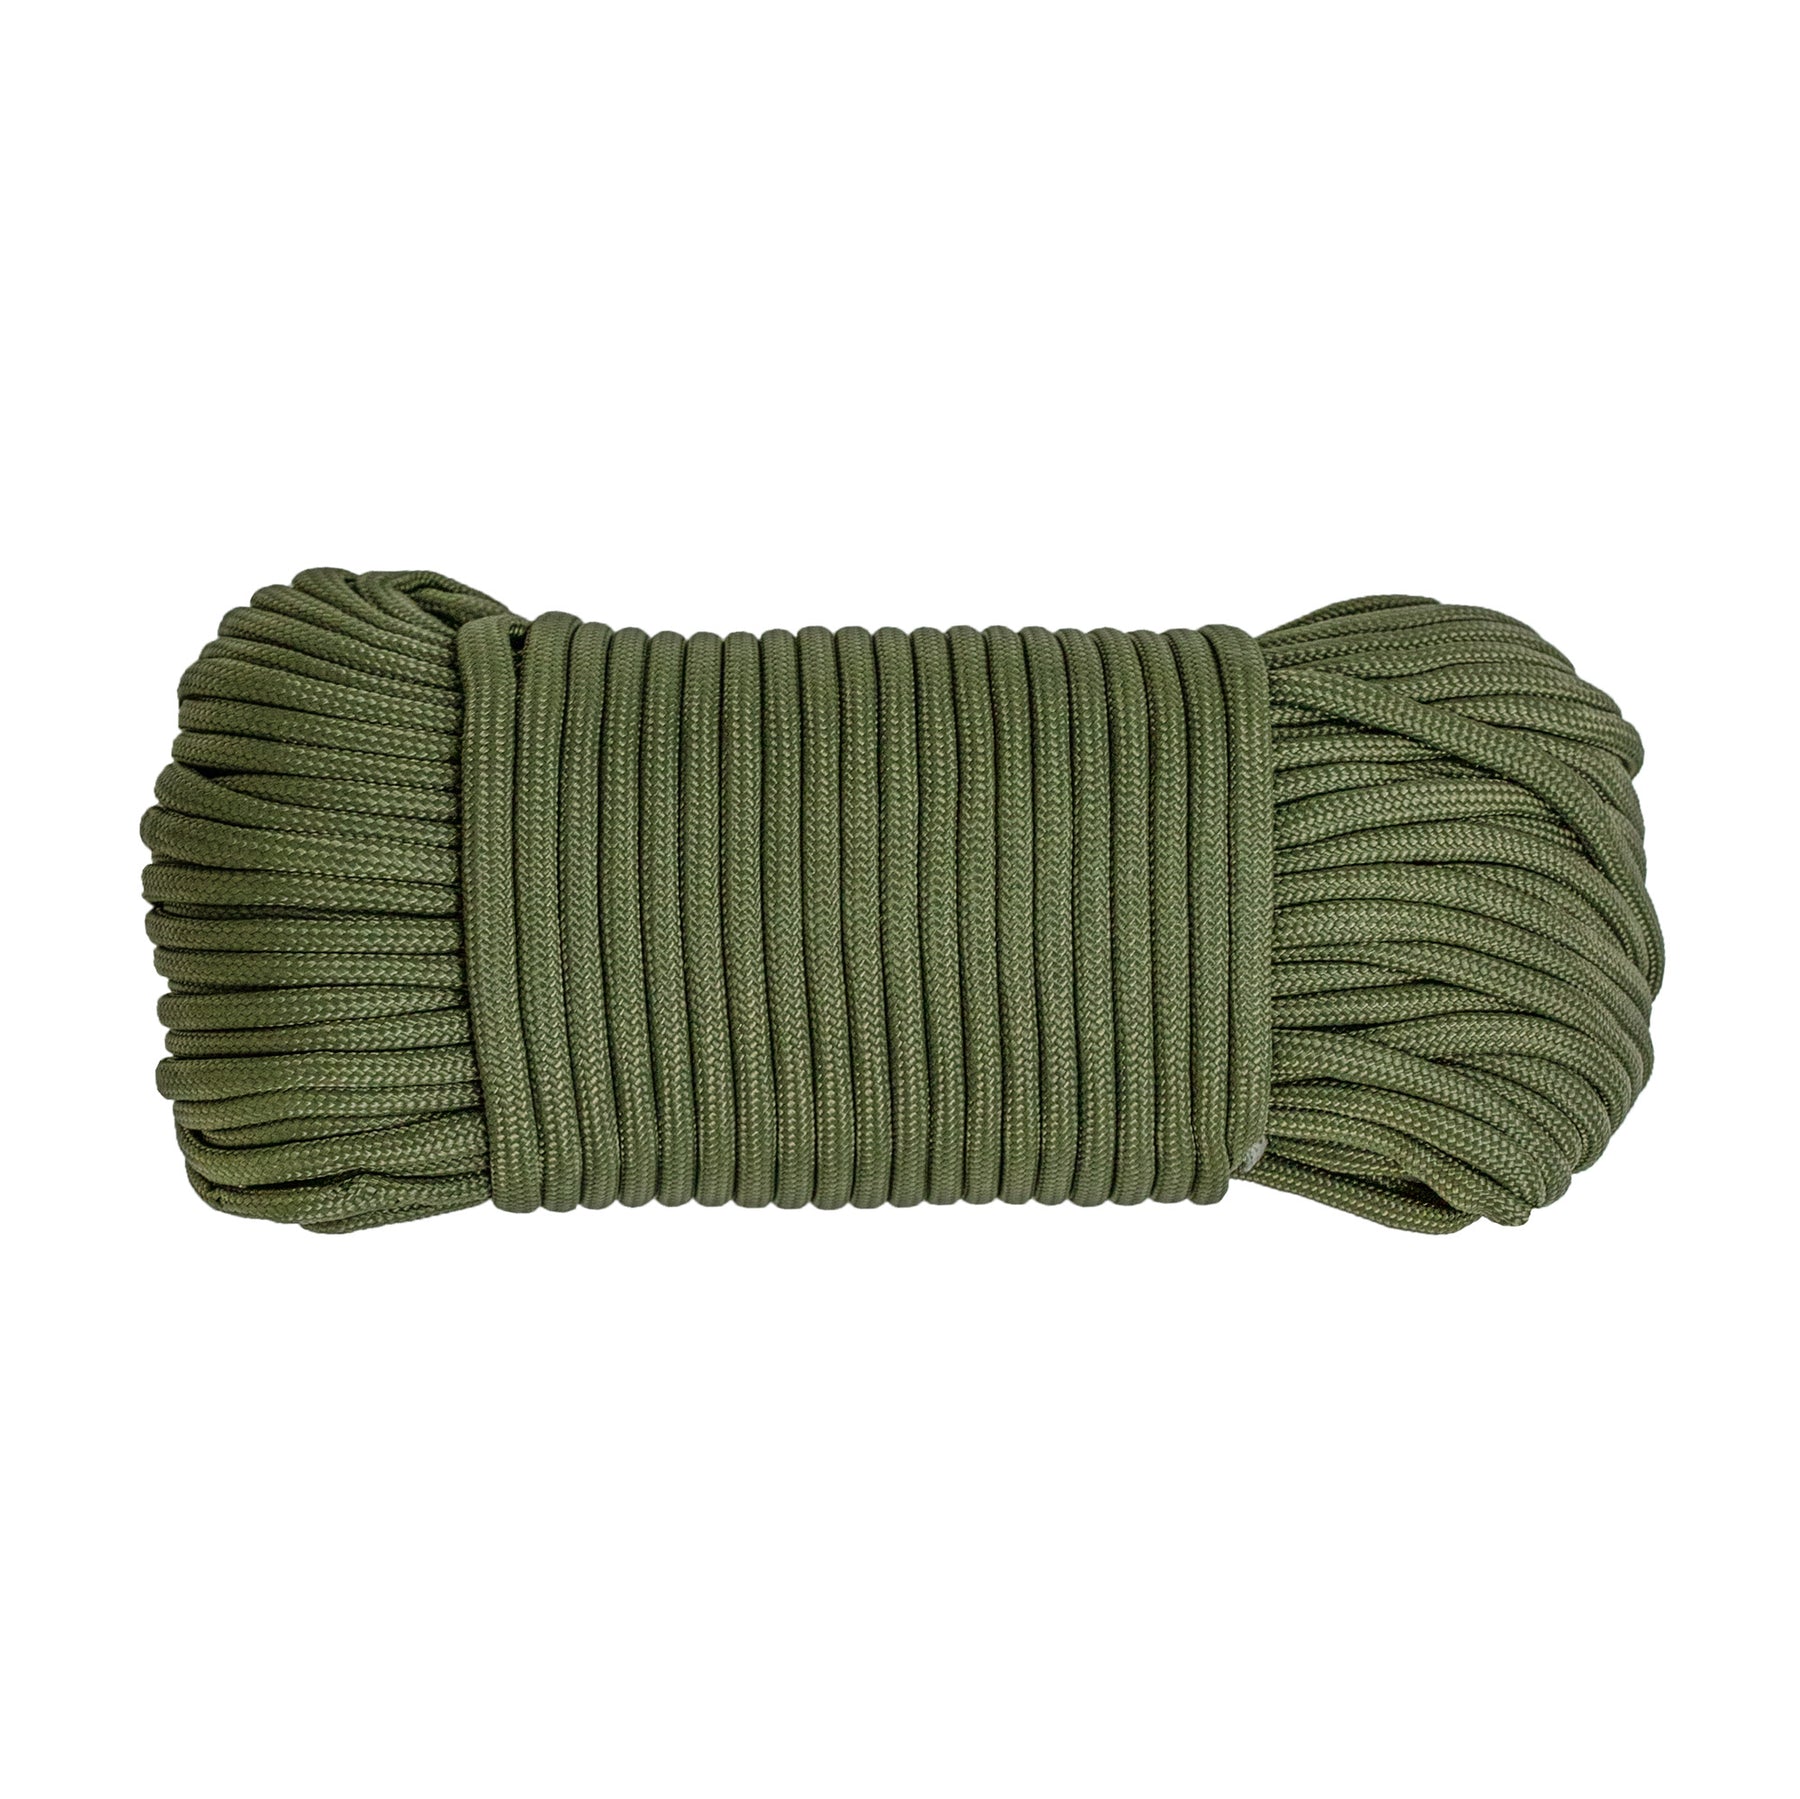 Mossy Oak Paracord Spool--Shop Strong Paracord – The Mossy Oak Store